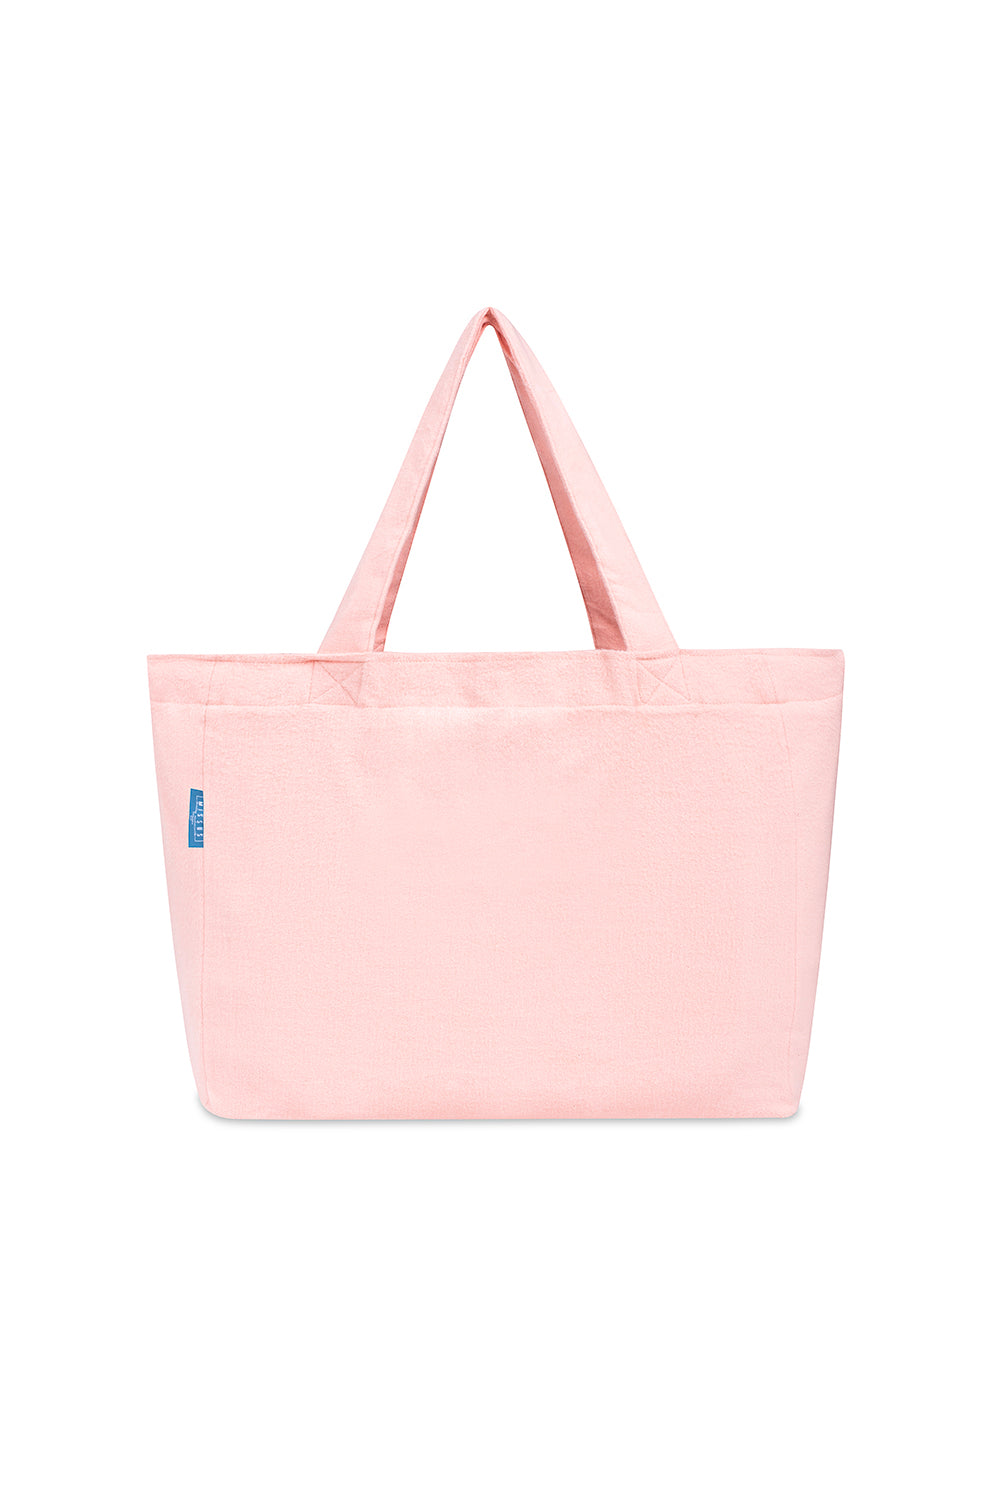 BEACH BAG MISSUS - PINK (OUT OF STOCK)